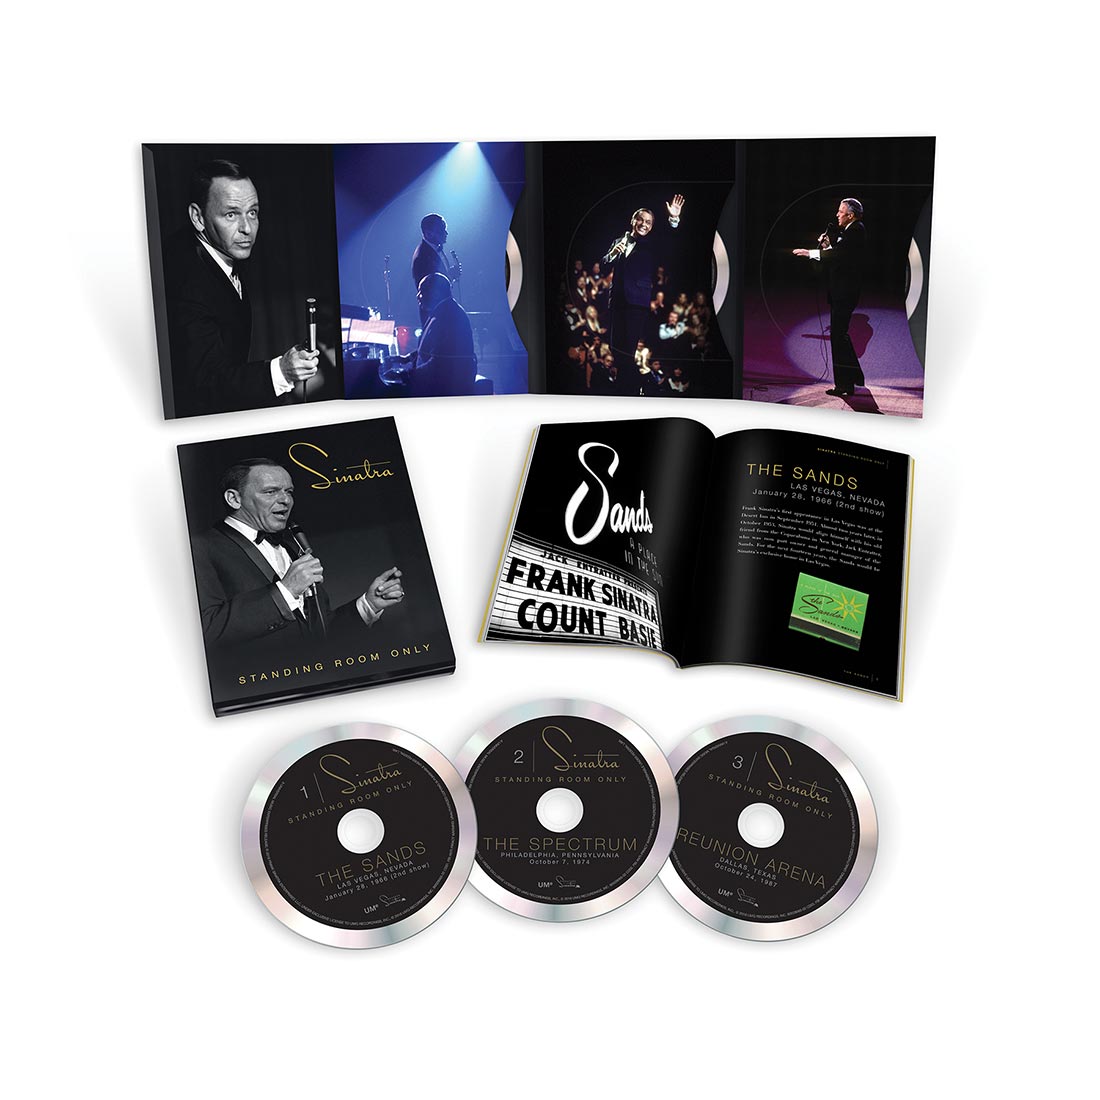 Frank Sinatra - Standing Room Only: CD Box Set